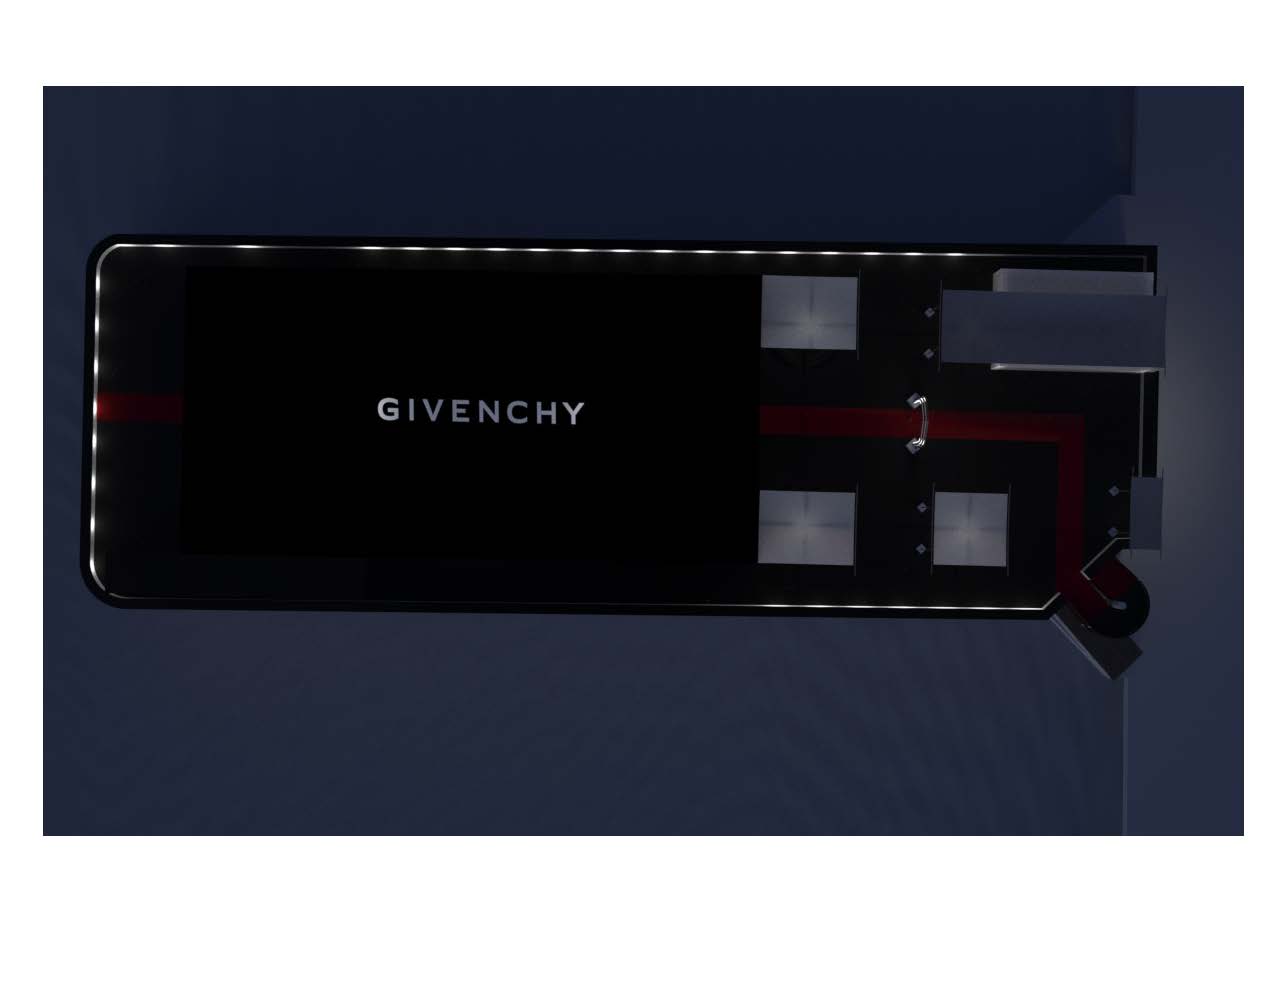 Givenchy aesthetical elements RESUME_Page_29.jpg